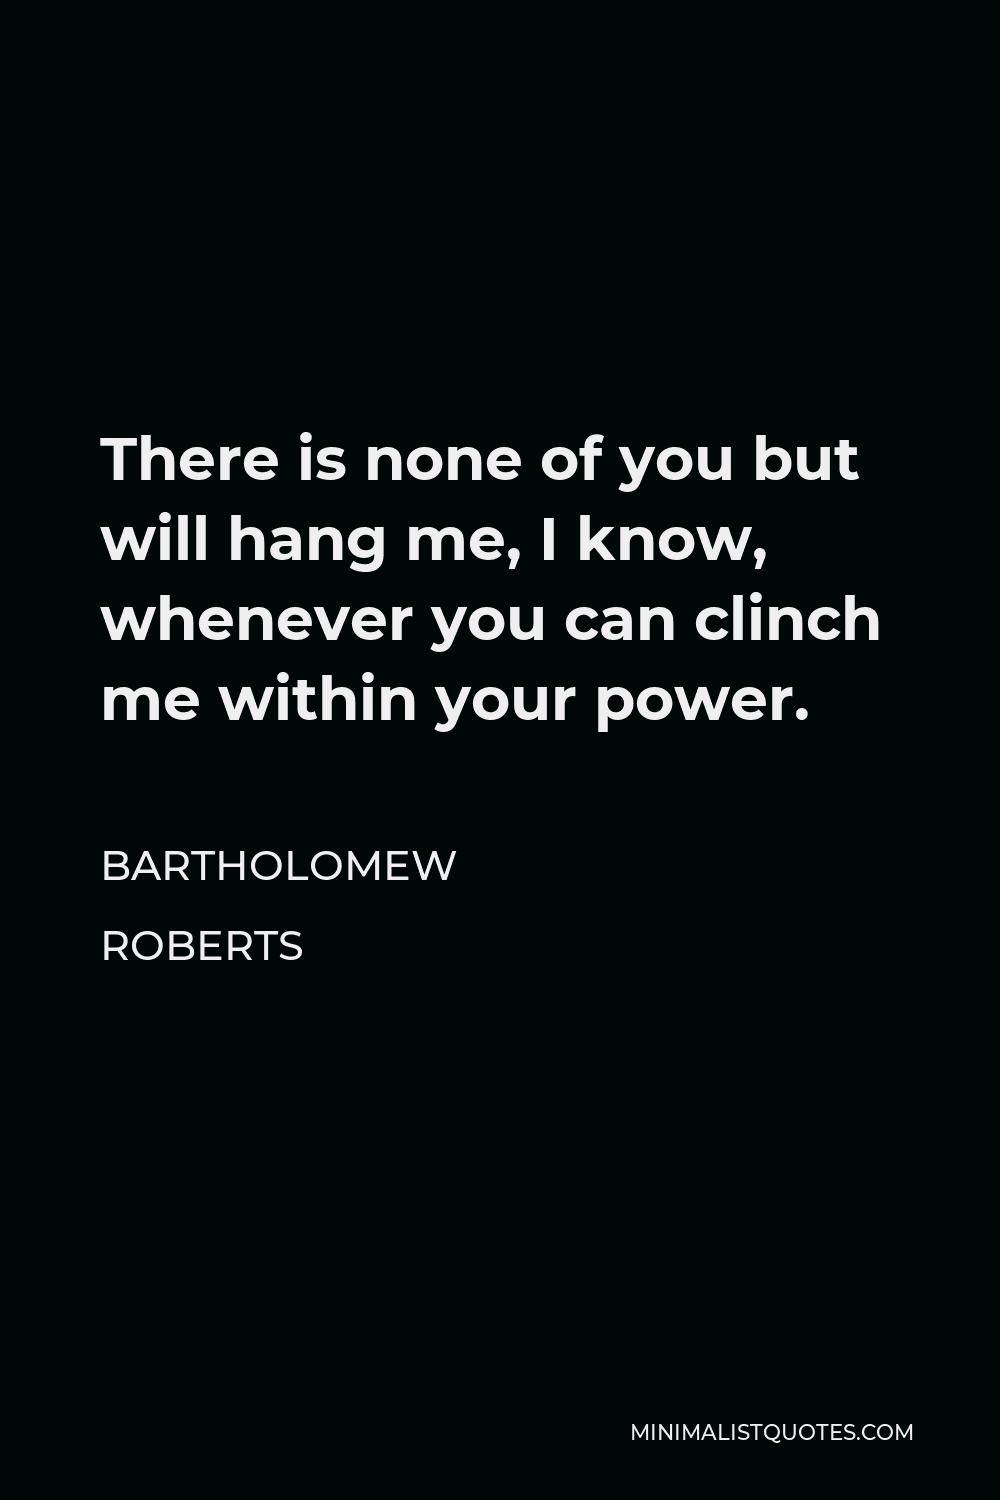 Bartholomew Roberts Quote - There is none of you but will hang me, I know, whenever you can clinch me within your power.